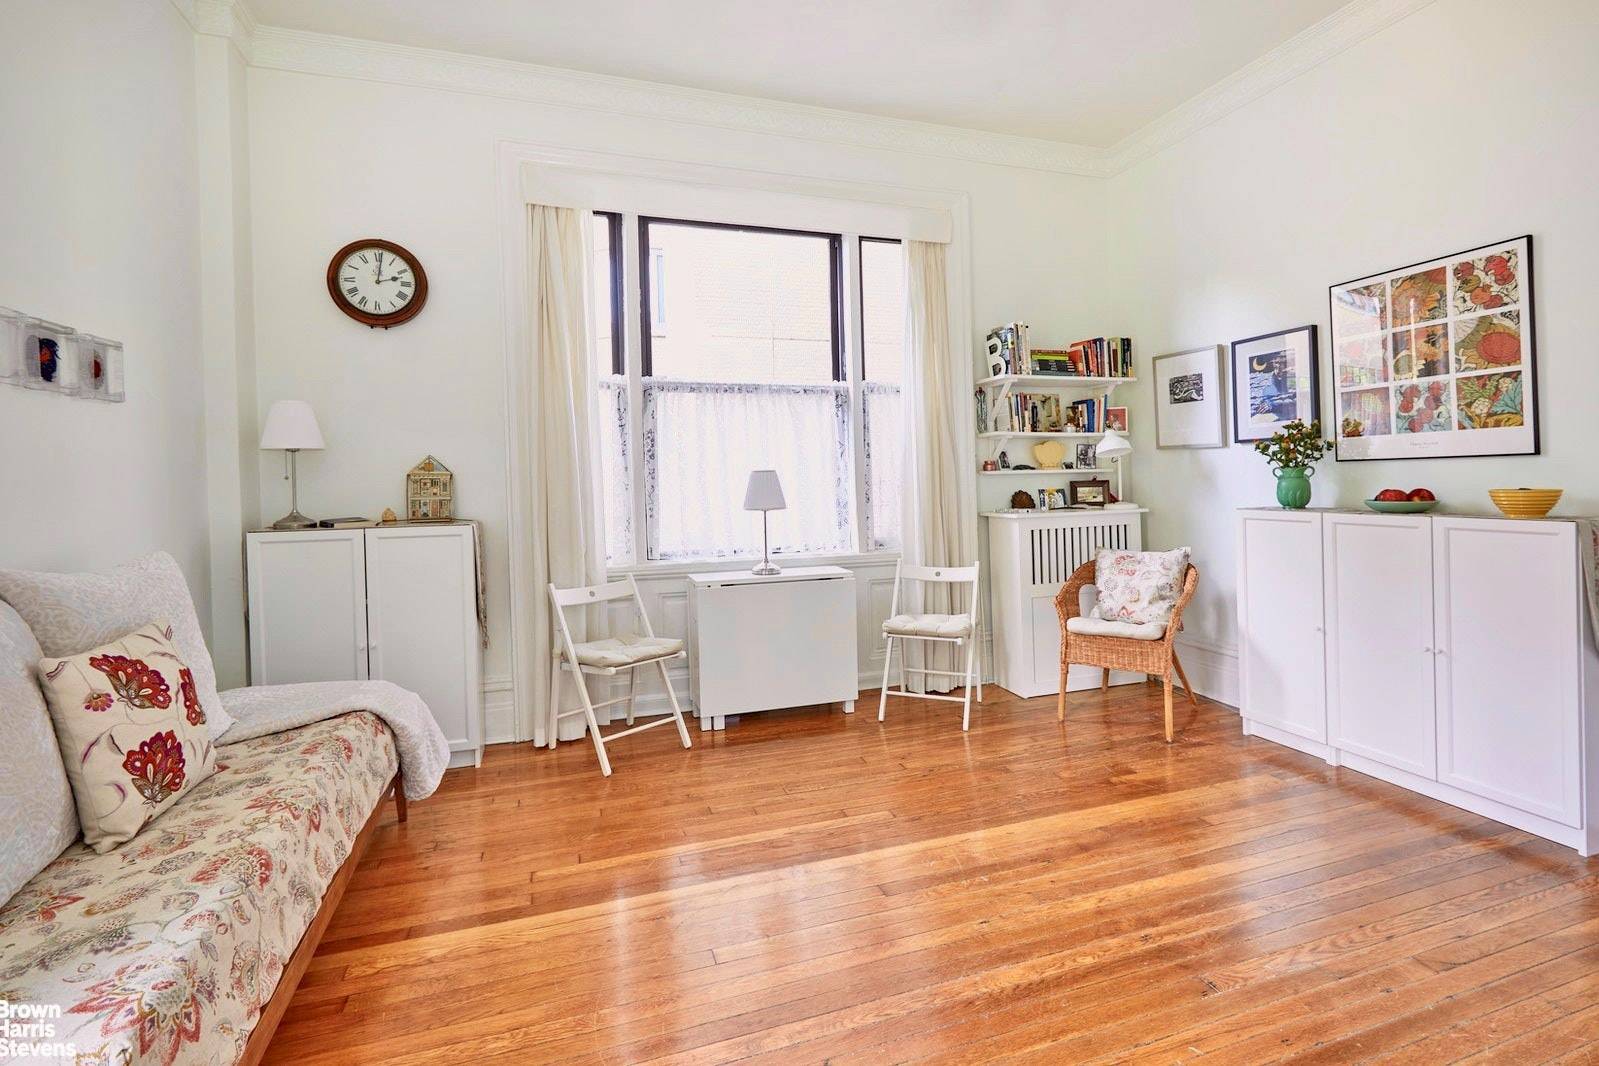 The Lincoln Spencer is a landmark building located steps from Central Park on the fabulously tree lined W 69th St, offering a full service, well maintained, pre war coop in ...